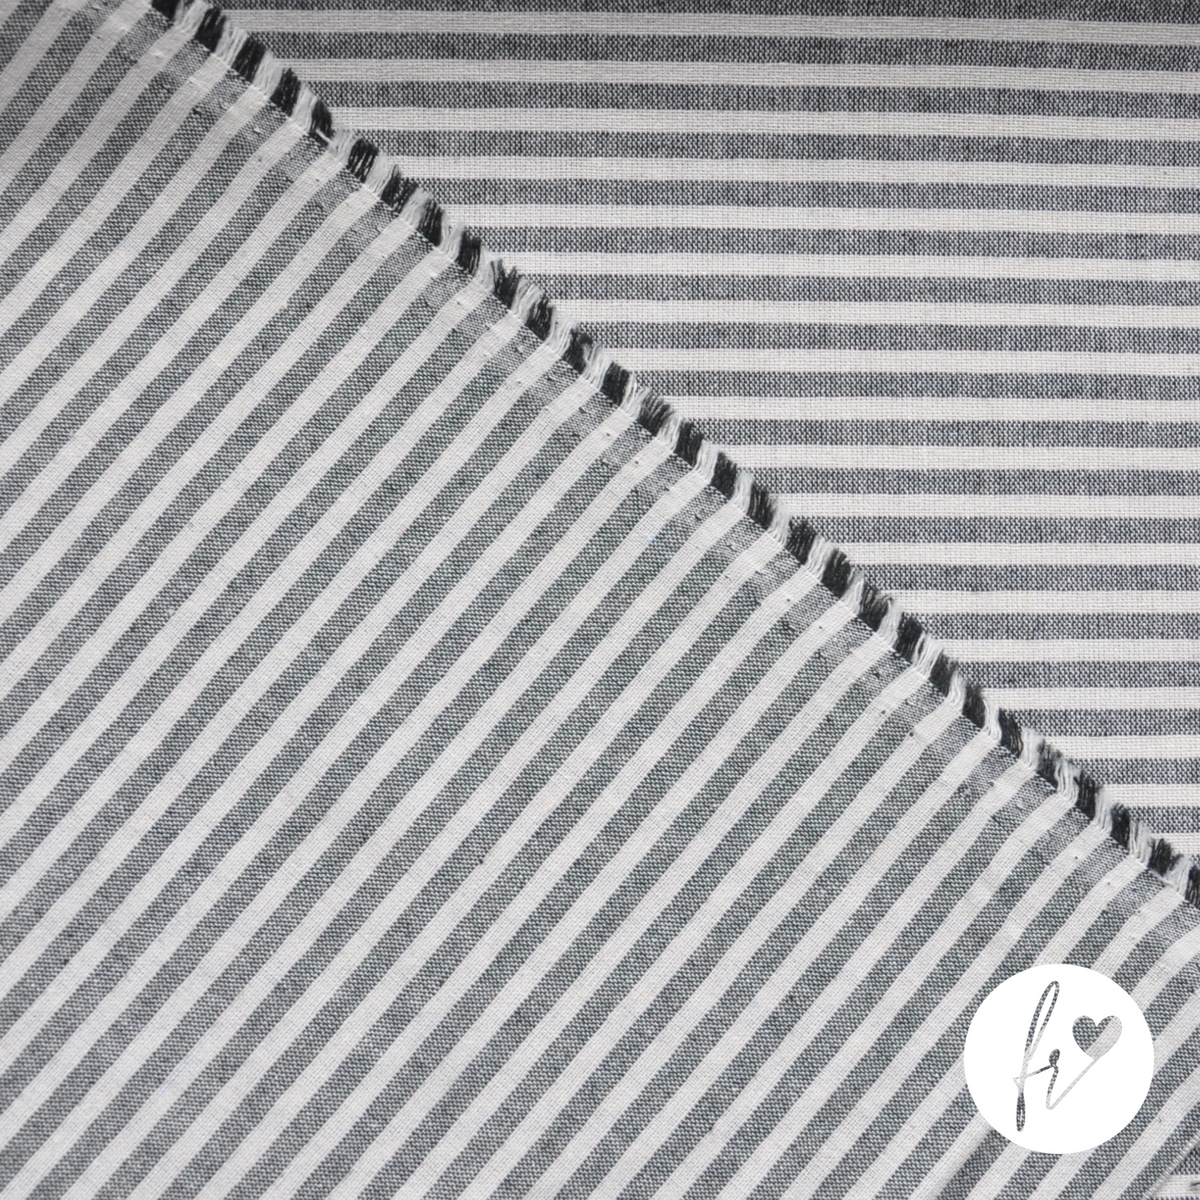 Woven Recycled Eco-Fabric - Stripes - Black